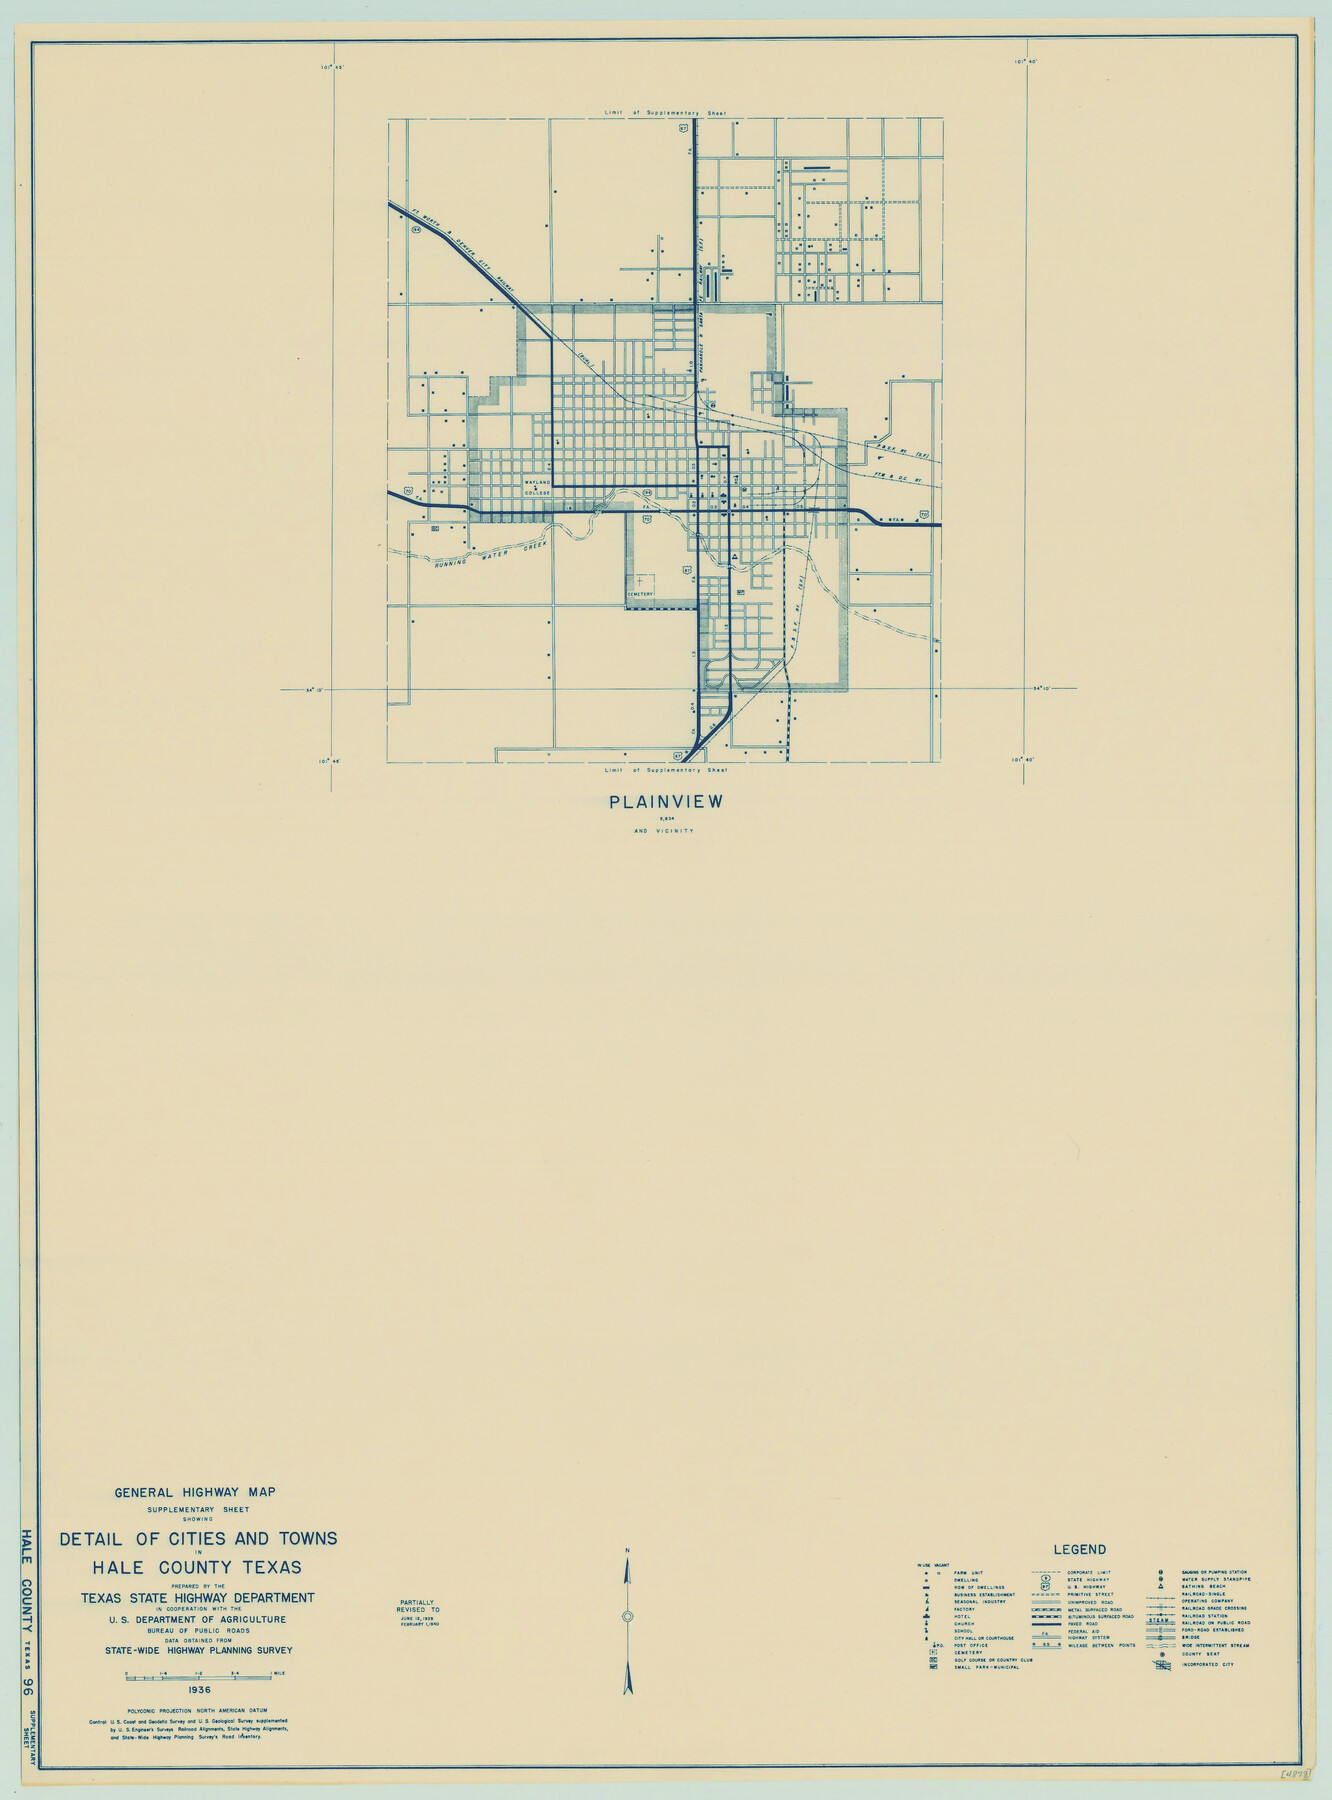 79109, General Highway Map.  Detail of Cities and Towns in Hale County, Texas [Plainview and vicinity], Texas State Library and Archives